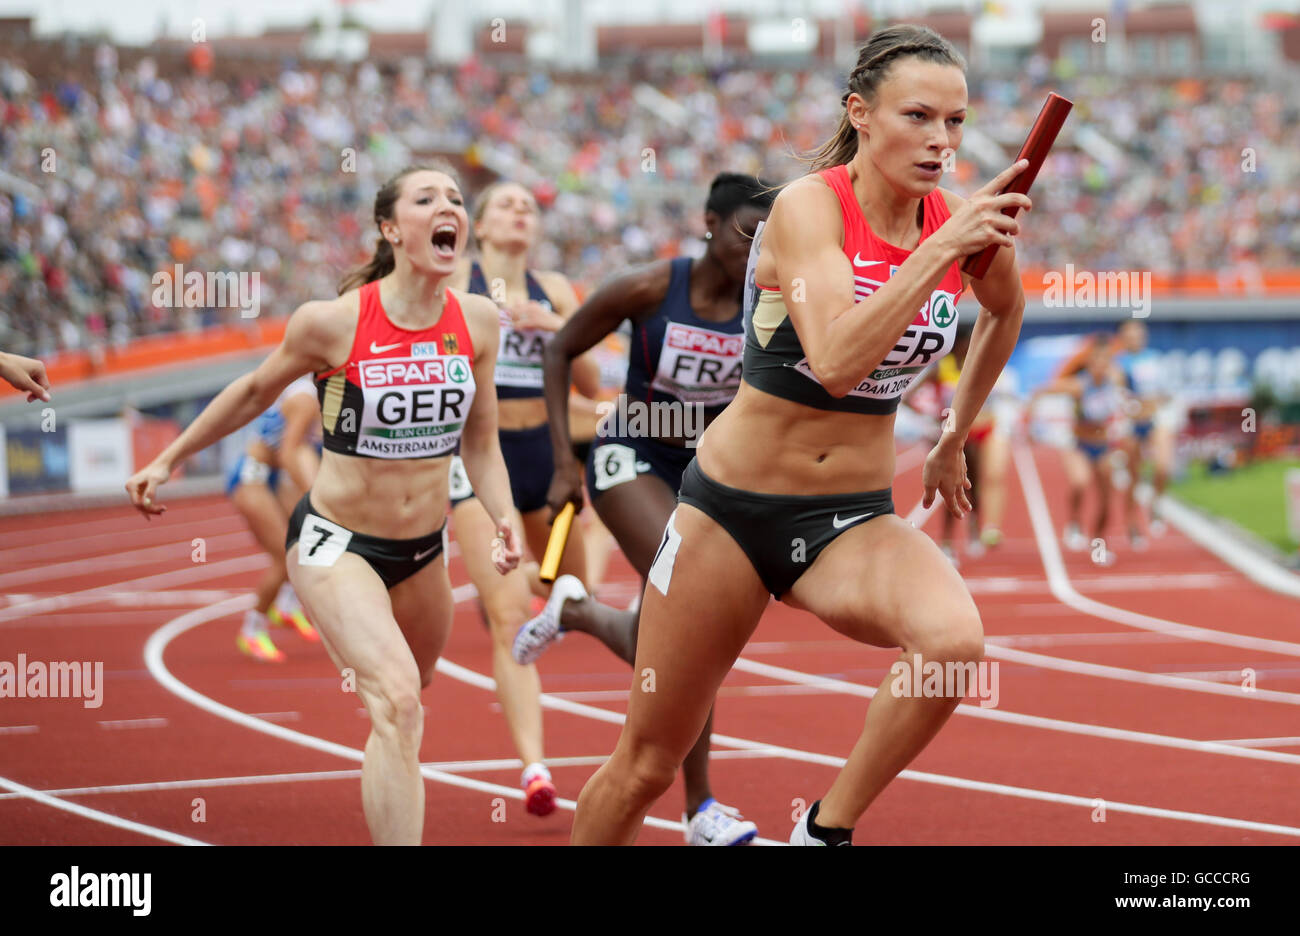 Amsterdam, The Netherlands. 9th July, 2016. German 4 x 400 relay with Laura Müller (L) and Friederike Möhlenkamp at the first change over at the European Athletics Championships at the Olympic Stadium in Amsterdam, The Netherlands, 9 July 2016. Photo: Michael Kappeler/dpa/Alamy Live News Stock Photo